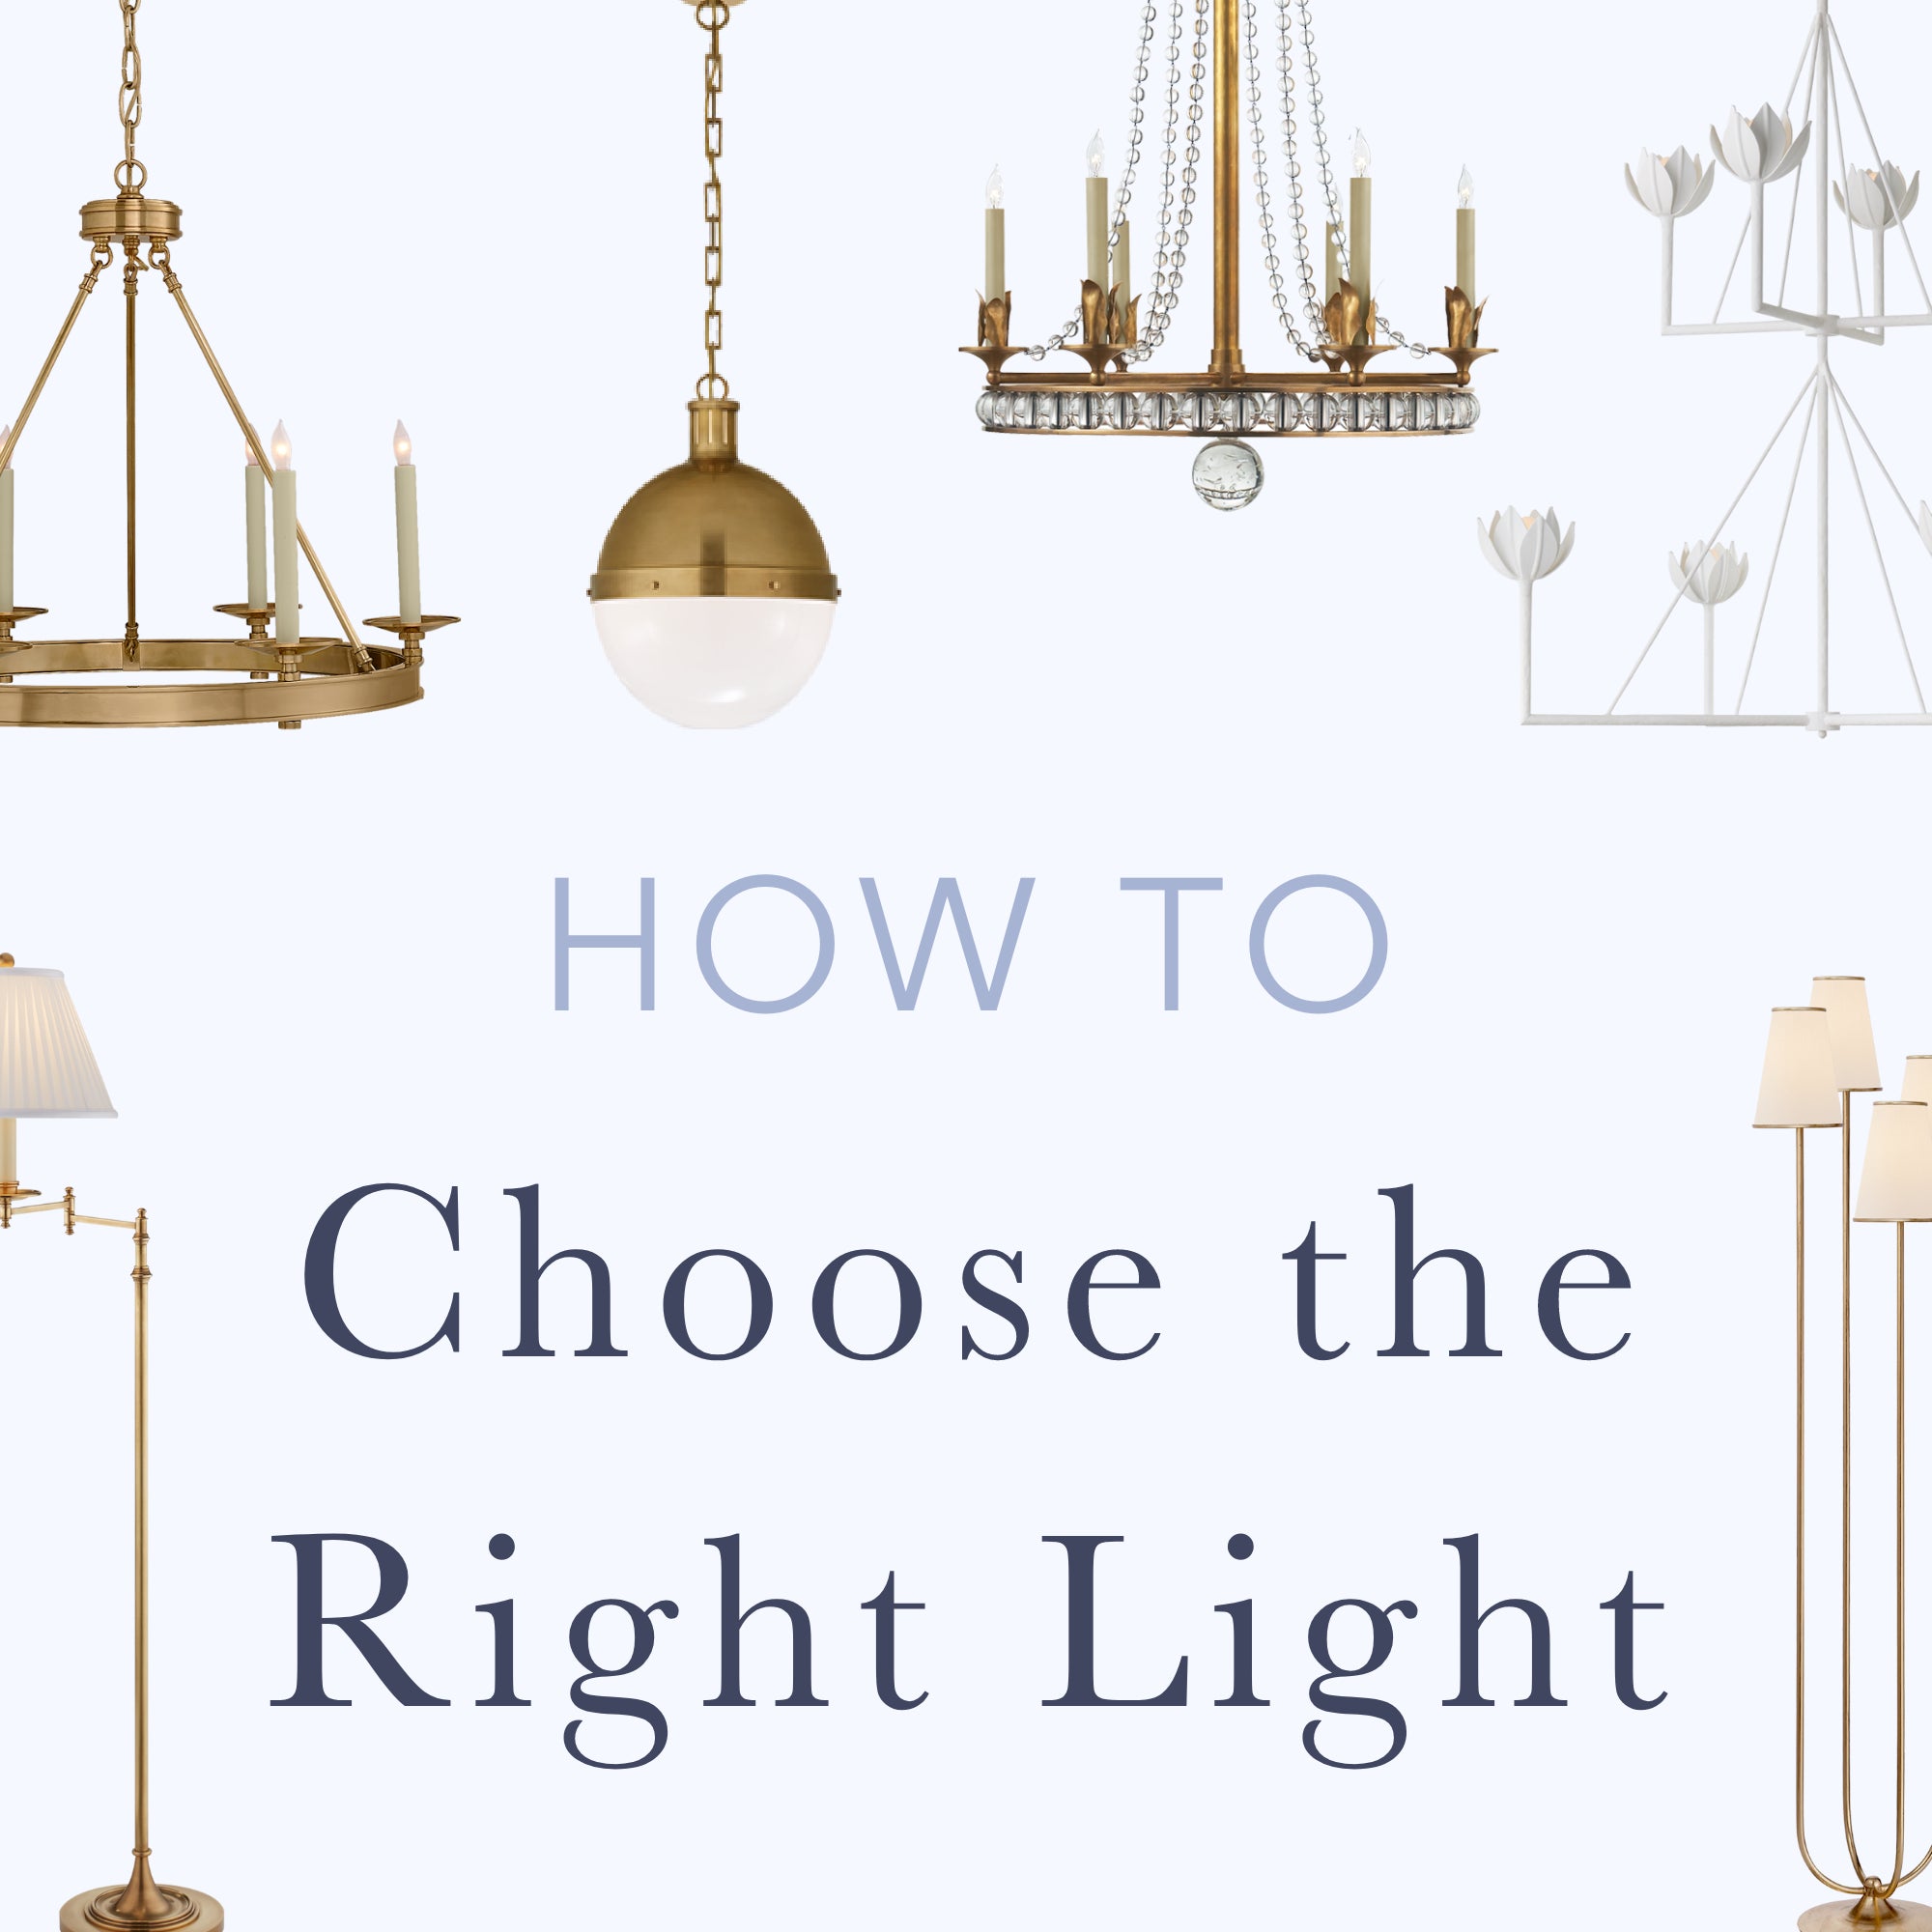 How to Choose the Right Light